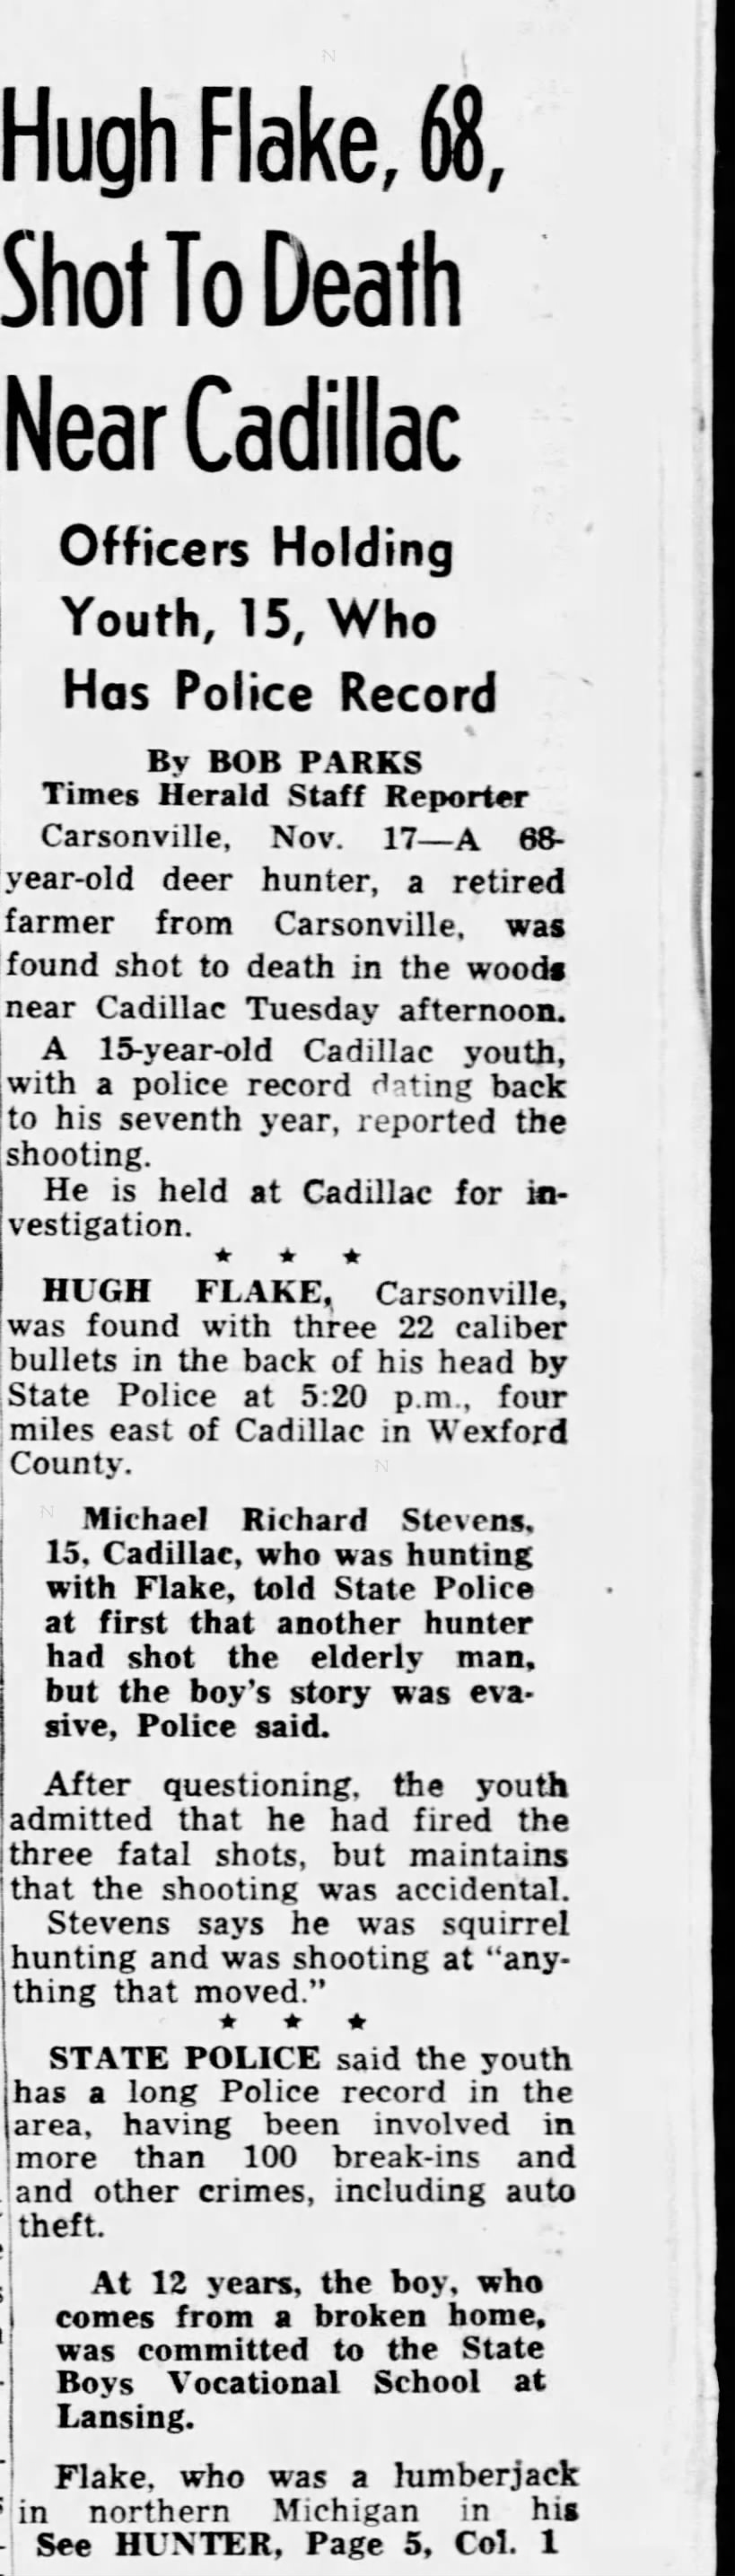 Hugh Flake - death by shooting, page 1 of article